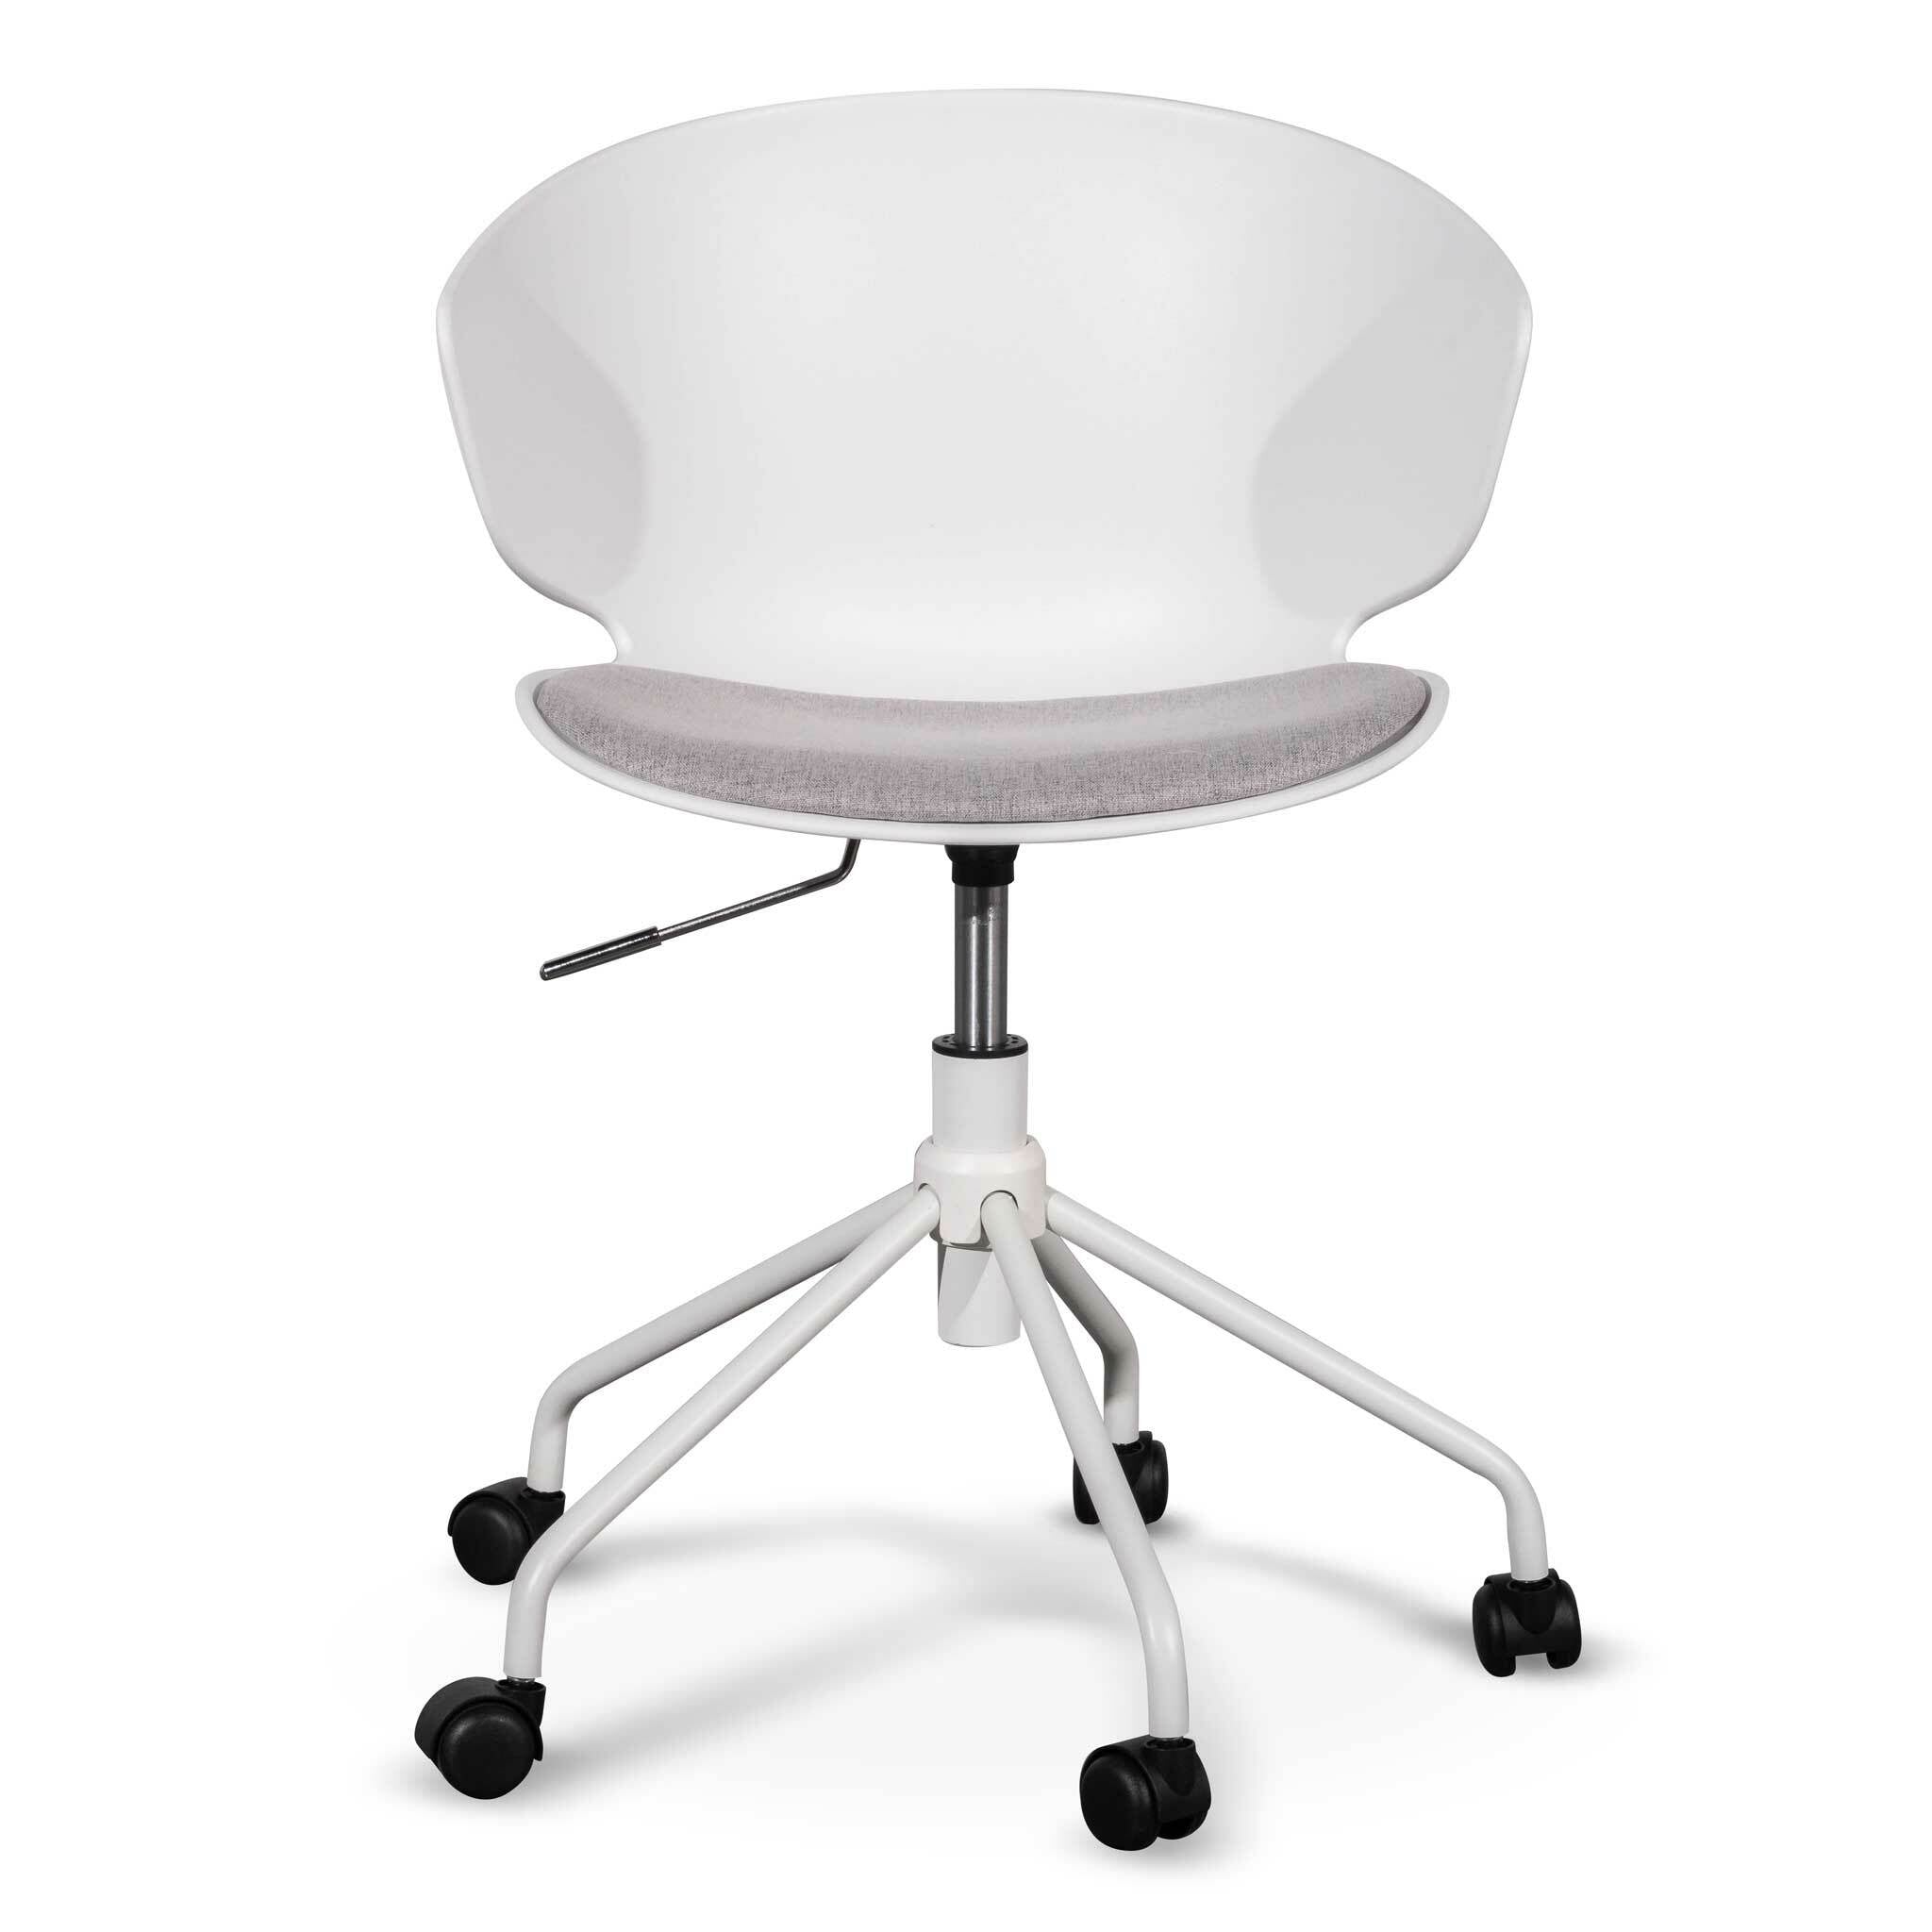 Betrillo White Office Chair - Light Grey Seat